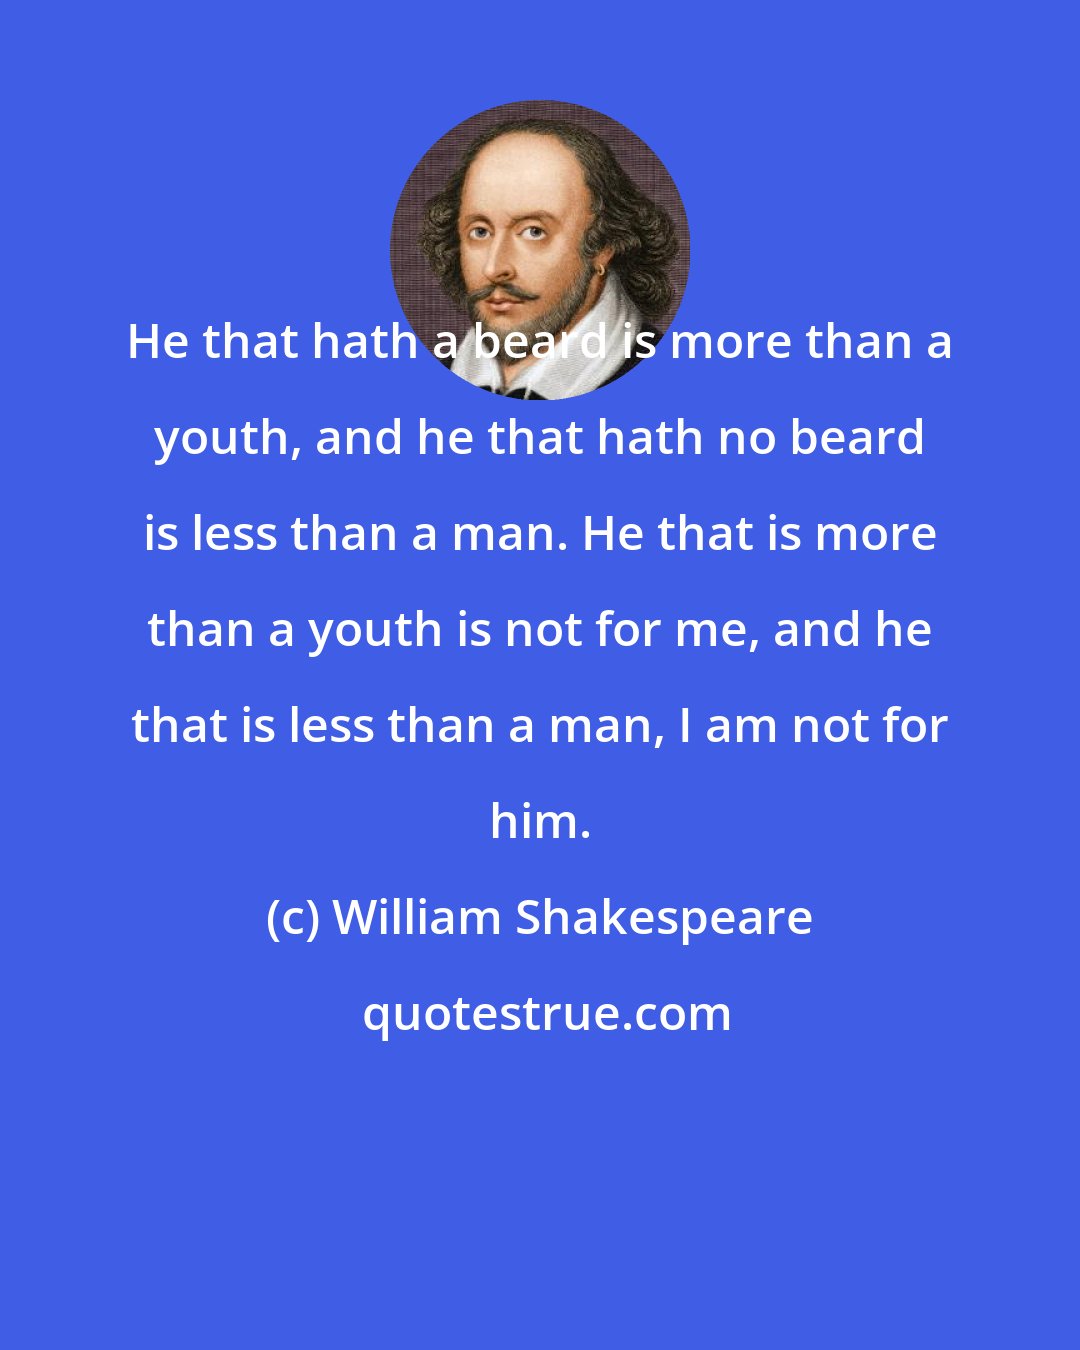 William Shakespeare: He that hath a beard is more than a youth, and he that hath no beard is less than a man. He that is more than a youth is not for me, and he that is less than a man, I am not for him.